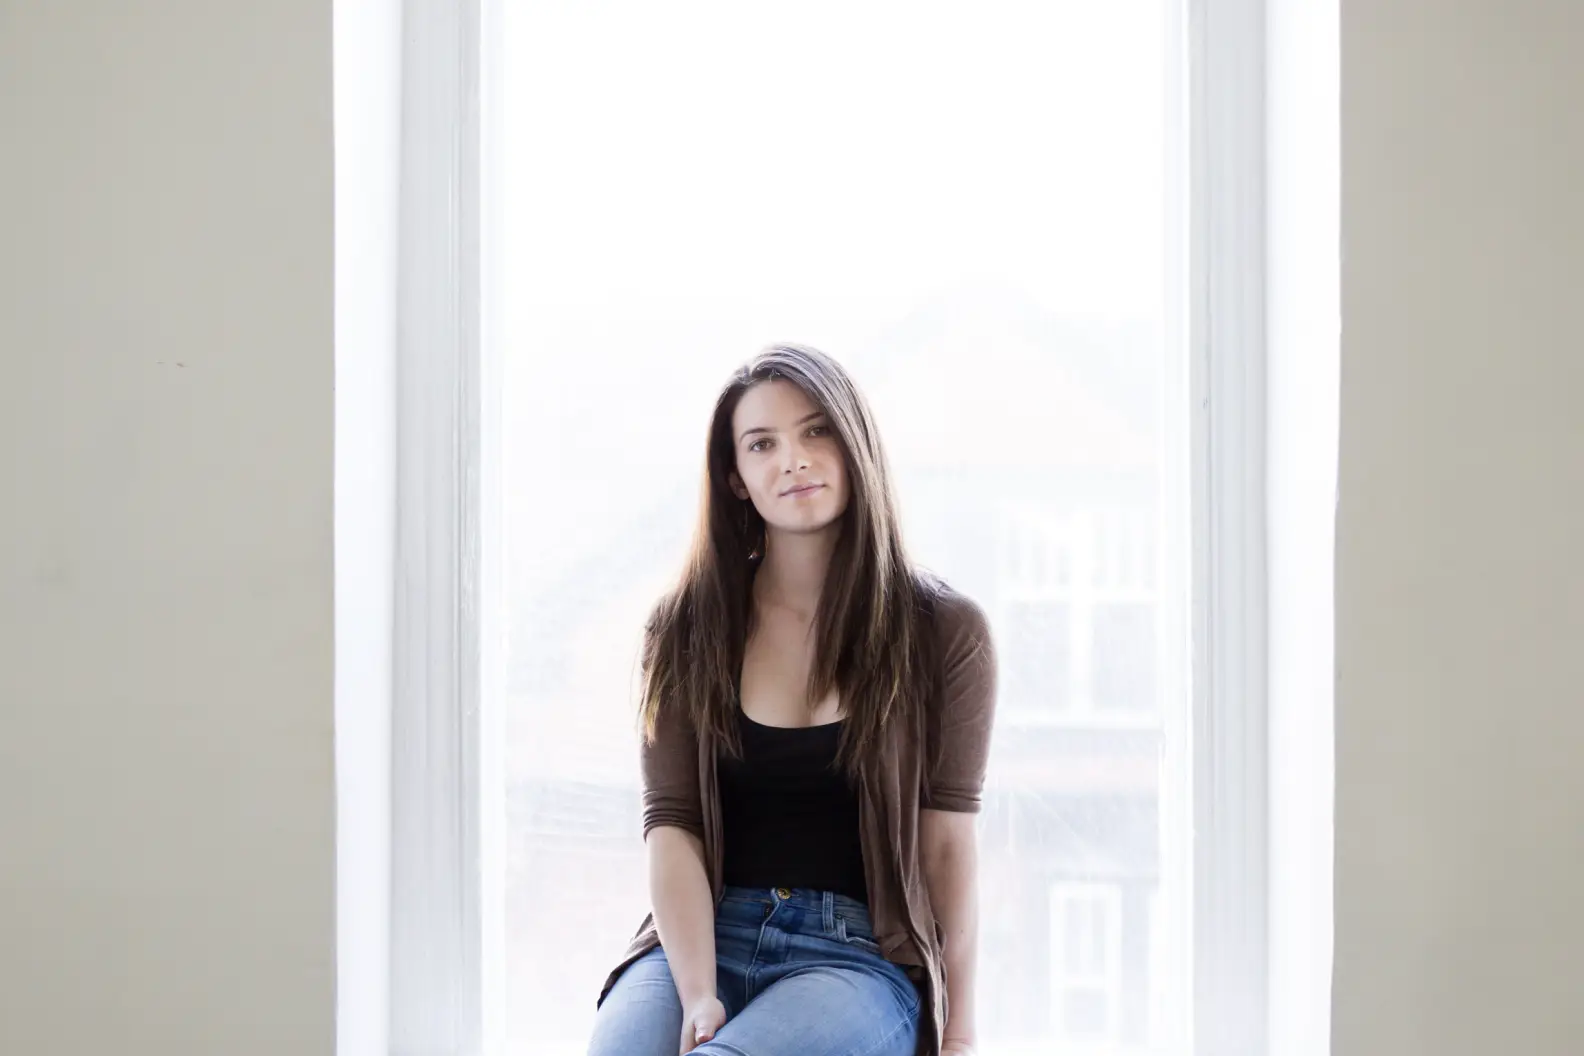 Young woman in sweater sitting in window sill smiling